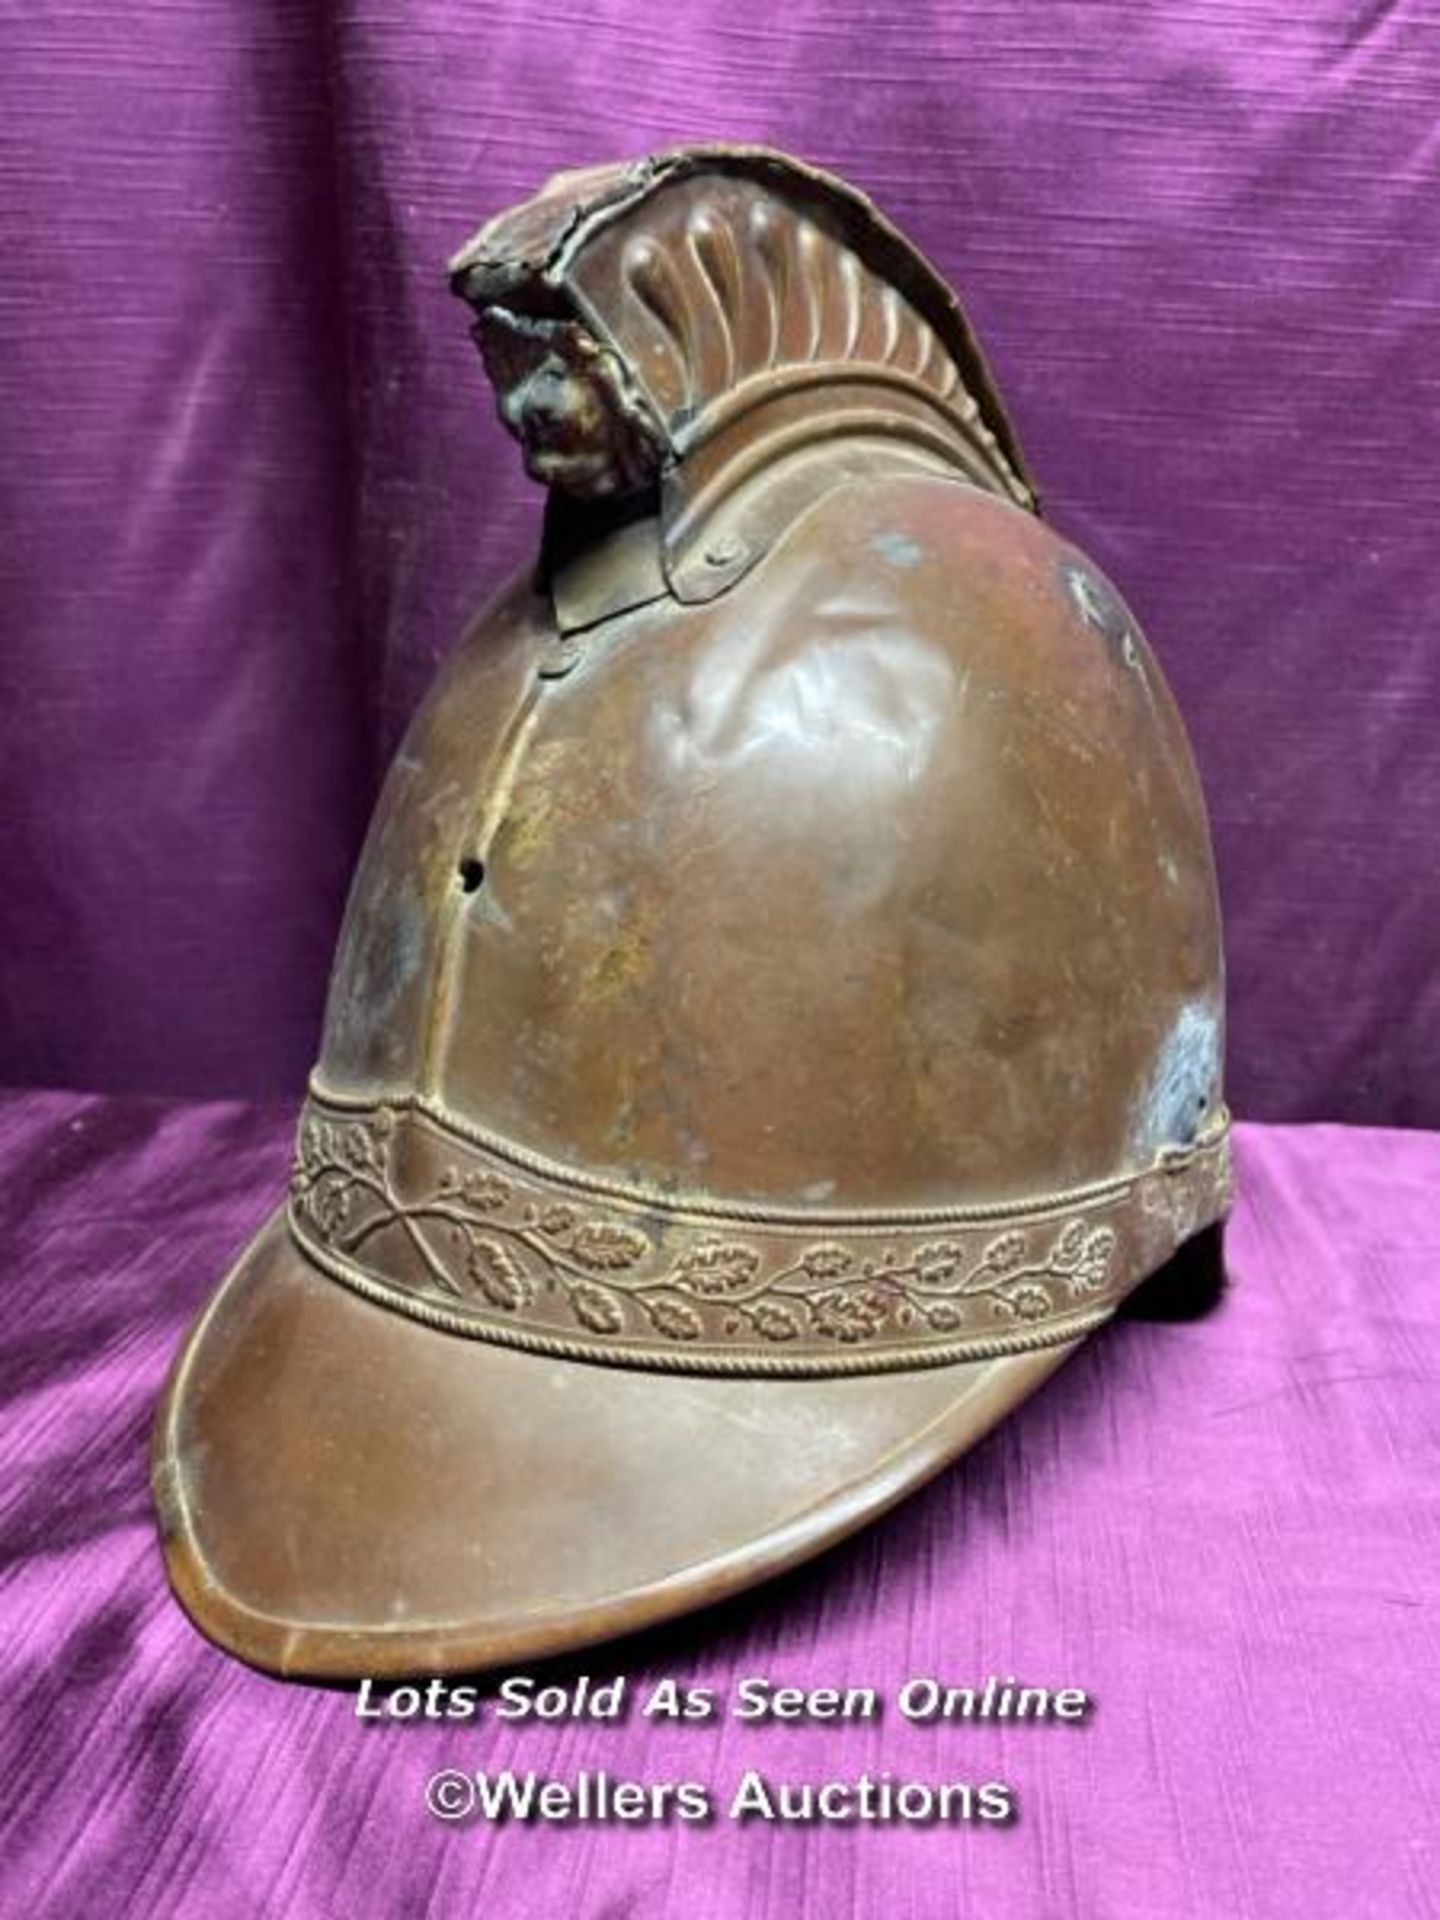 19TH CENTURY FRENCH SAPEURS AND POMPIERS HELMET, HEIGHT 24CM